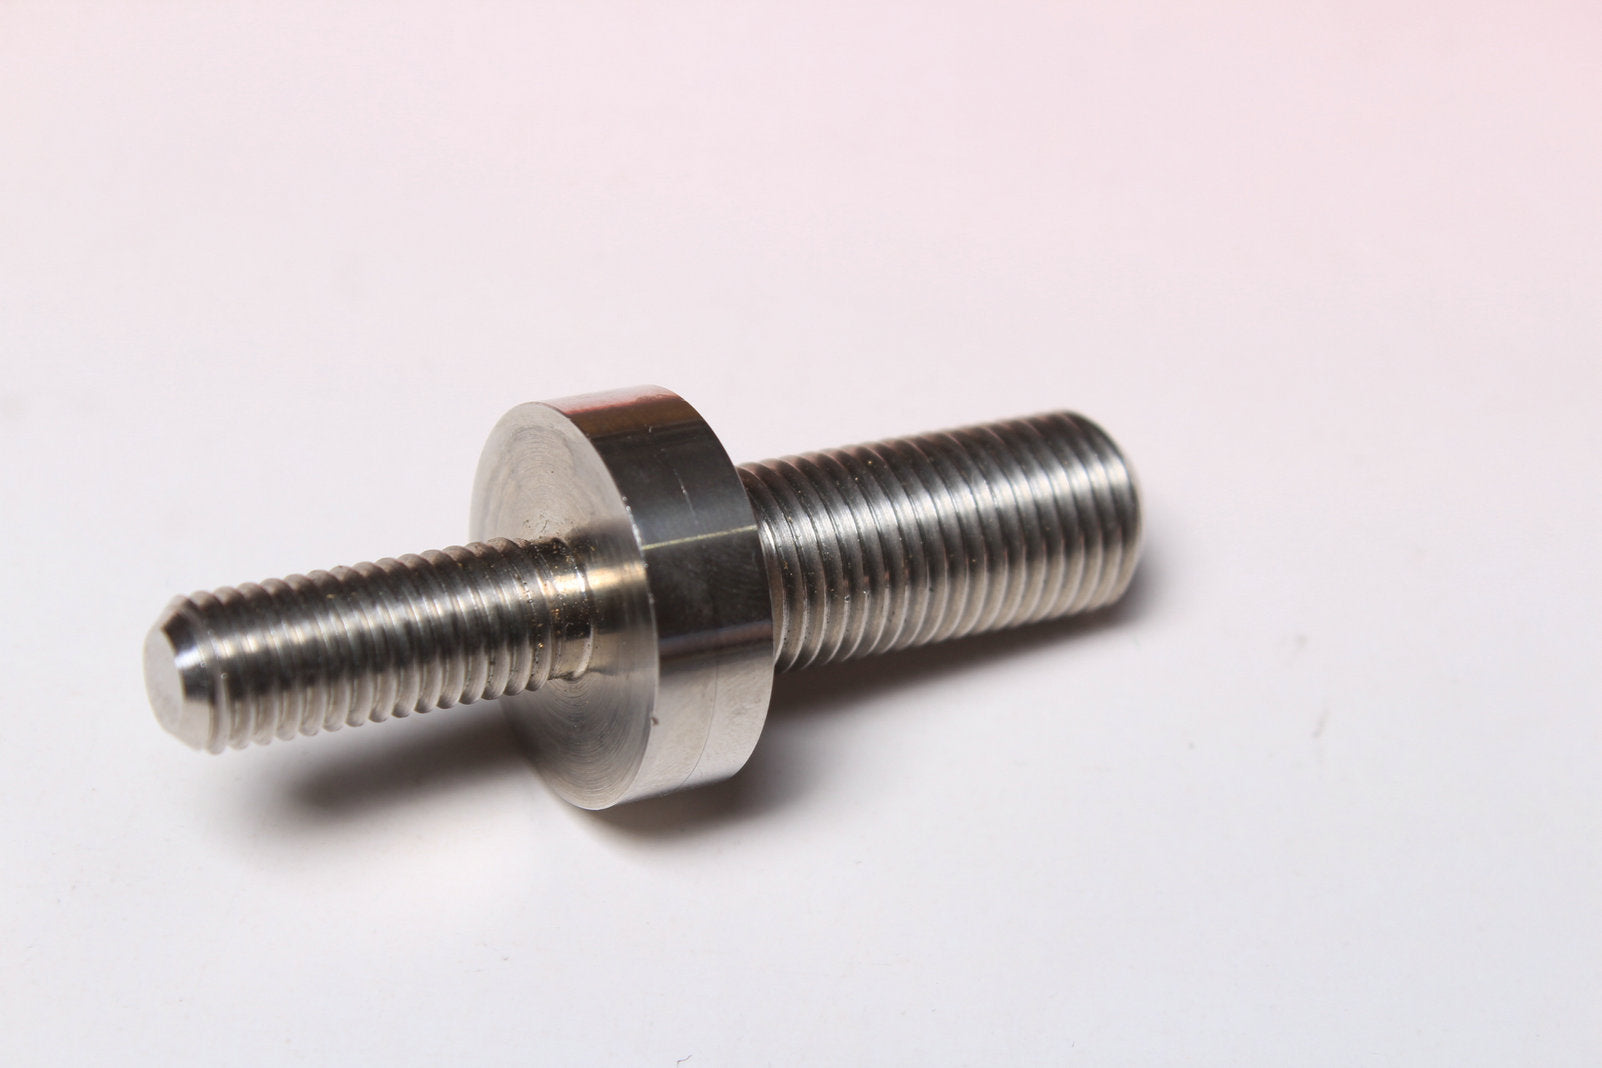 stainless steel joint for pool snooker cue 25.9 mm diameter